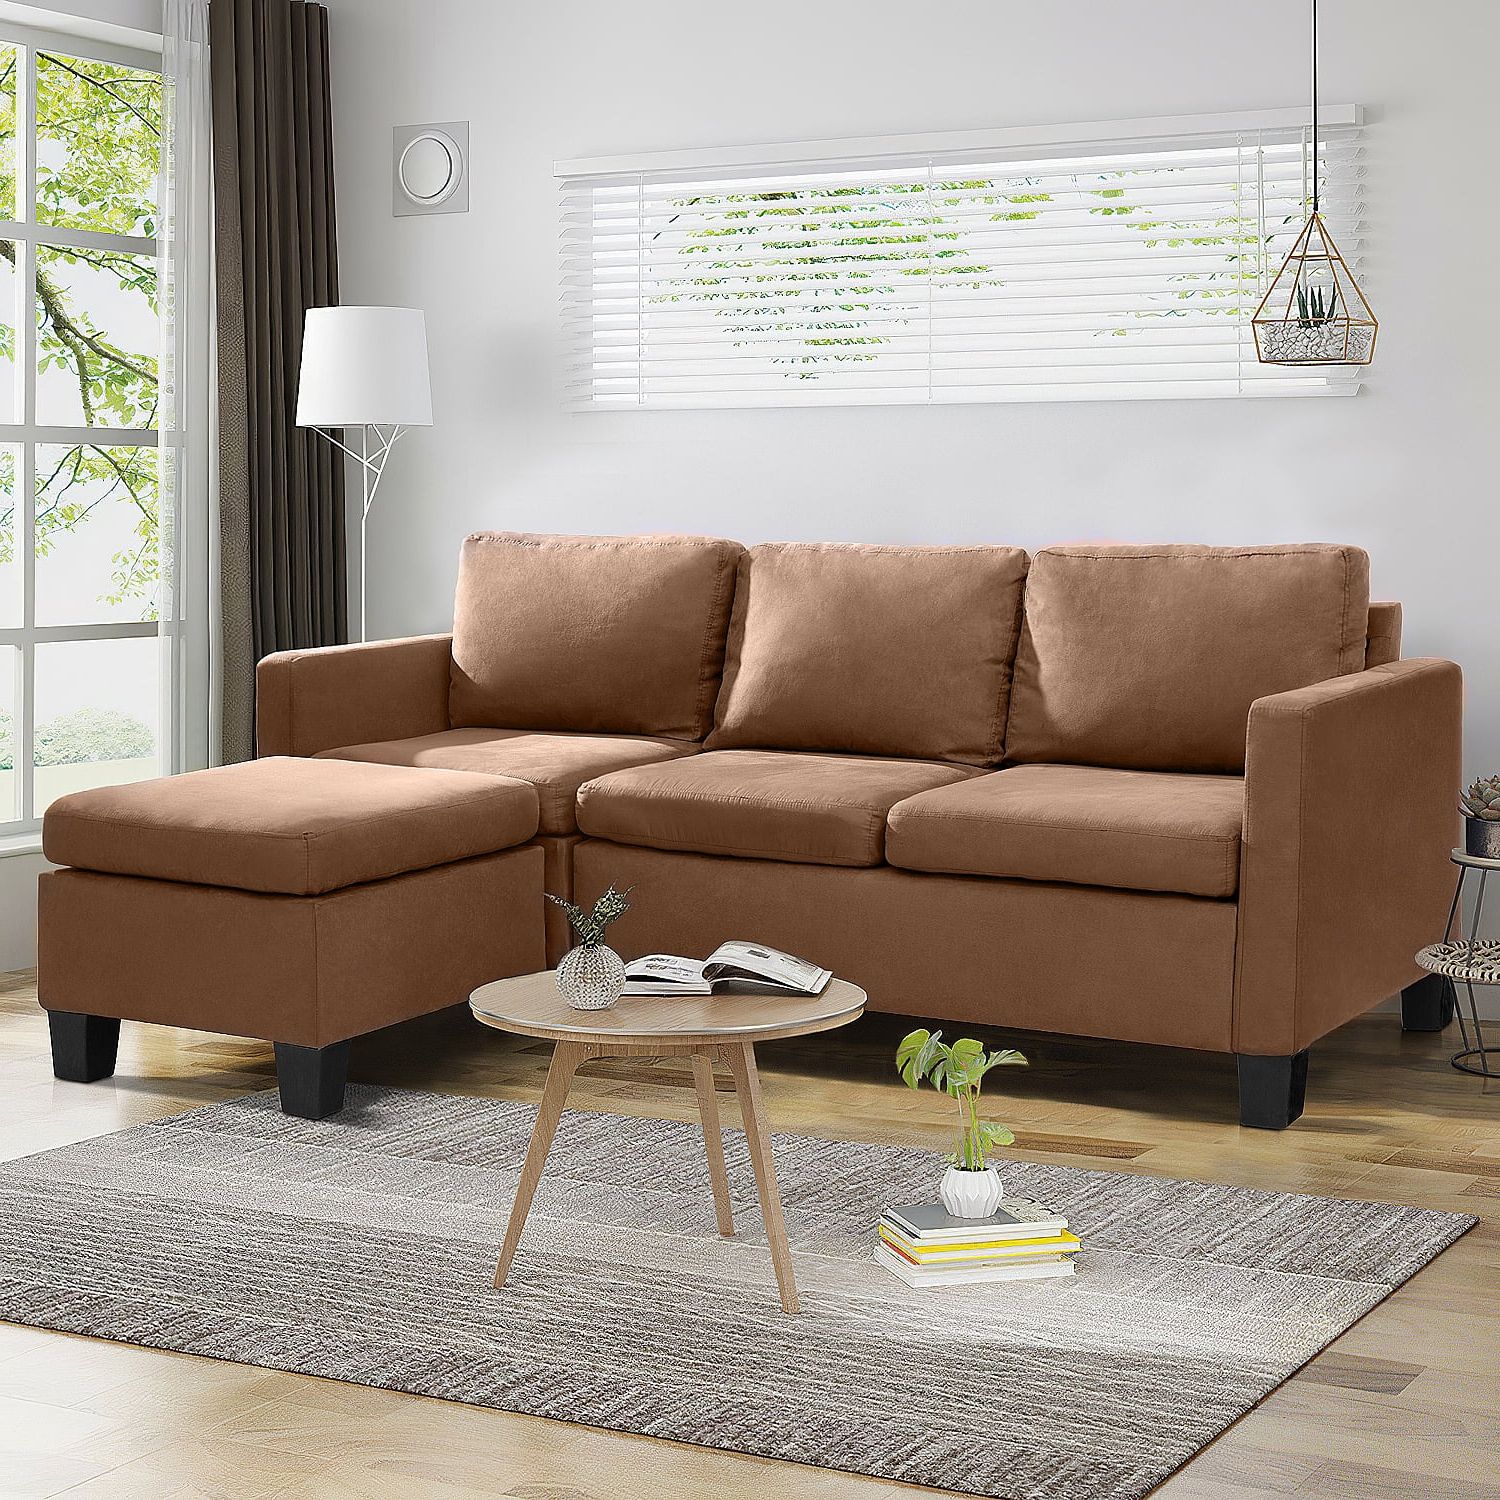 Vineego L Shaped Sofa Suede Fabric Convertible Sectional Sofa With Regarding L Shape Couches With Reversible Chaises (View 5 of 20)